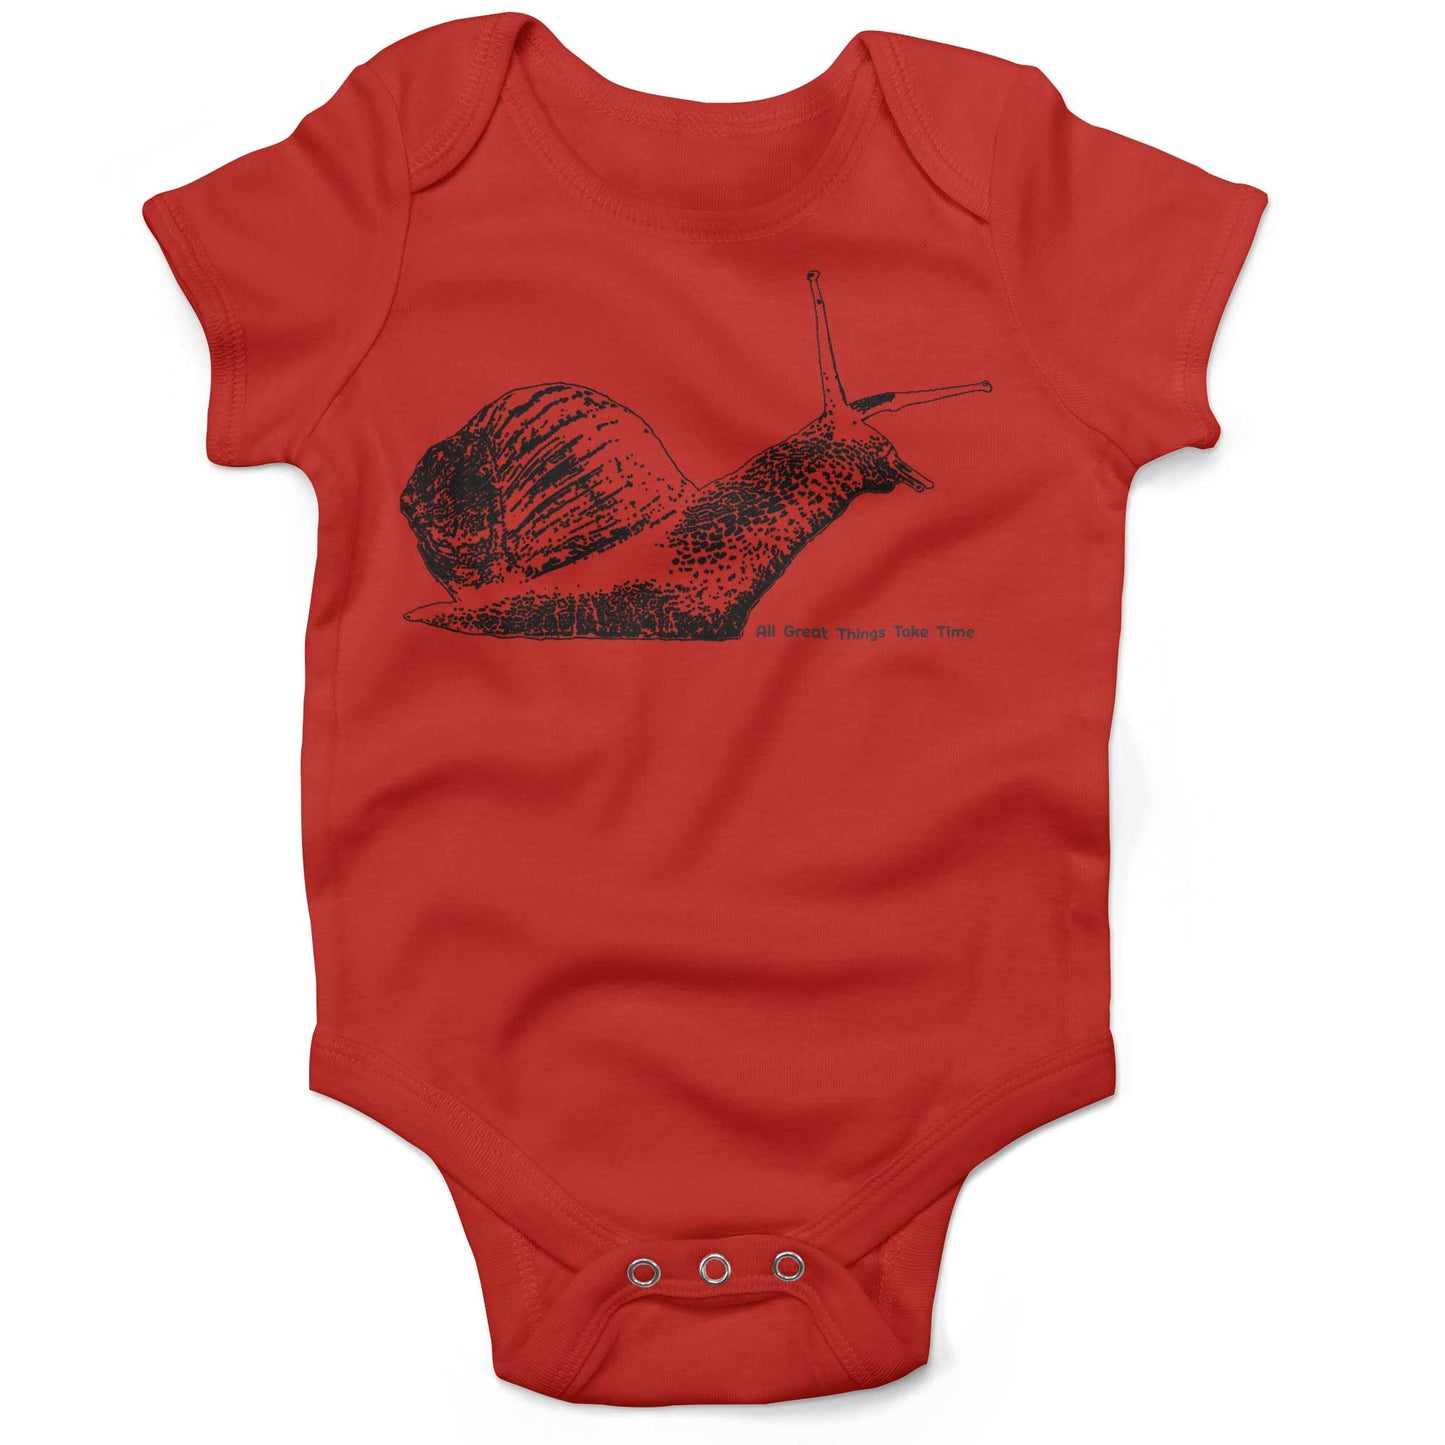 All Great Things Take Time Baby One Piece-Organic Red-3-6 months